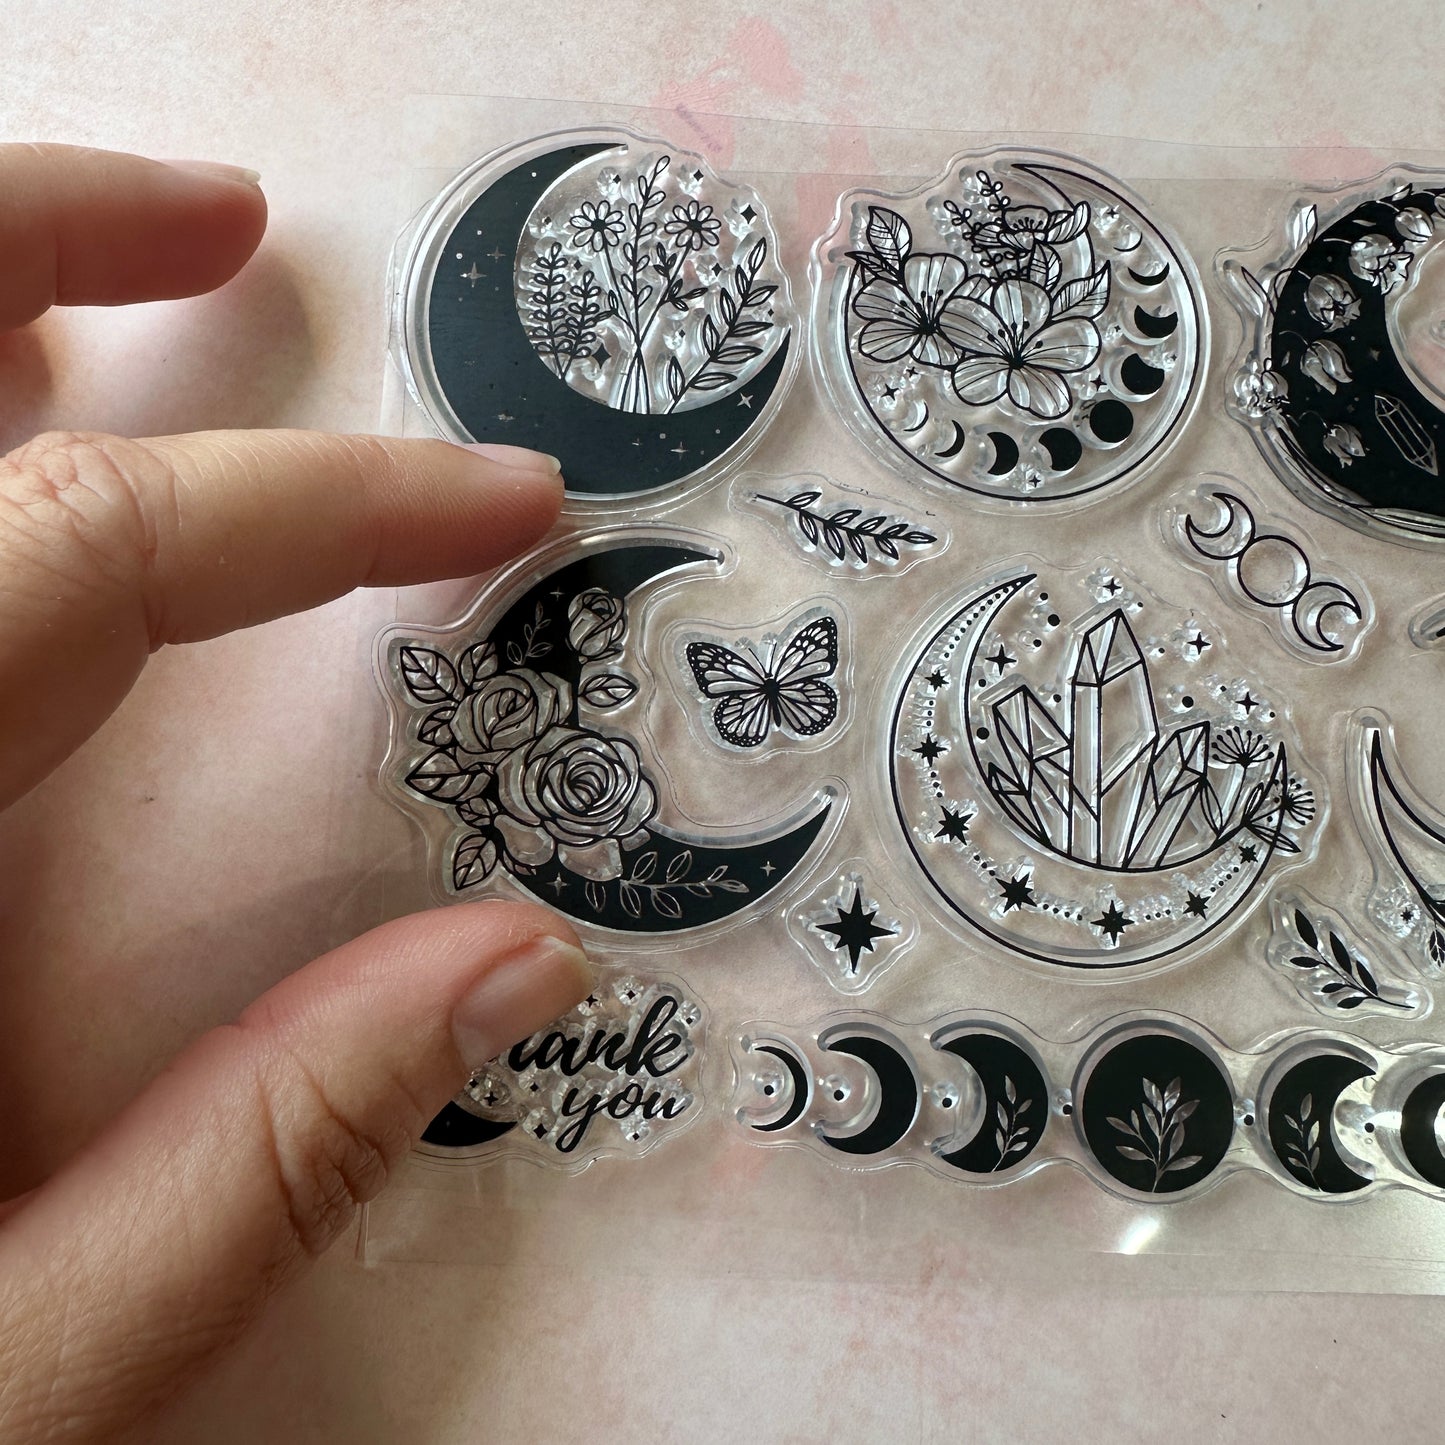 Celestial Moons clear rubber stamp polymer clay scrapbook mixed media gelli printing